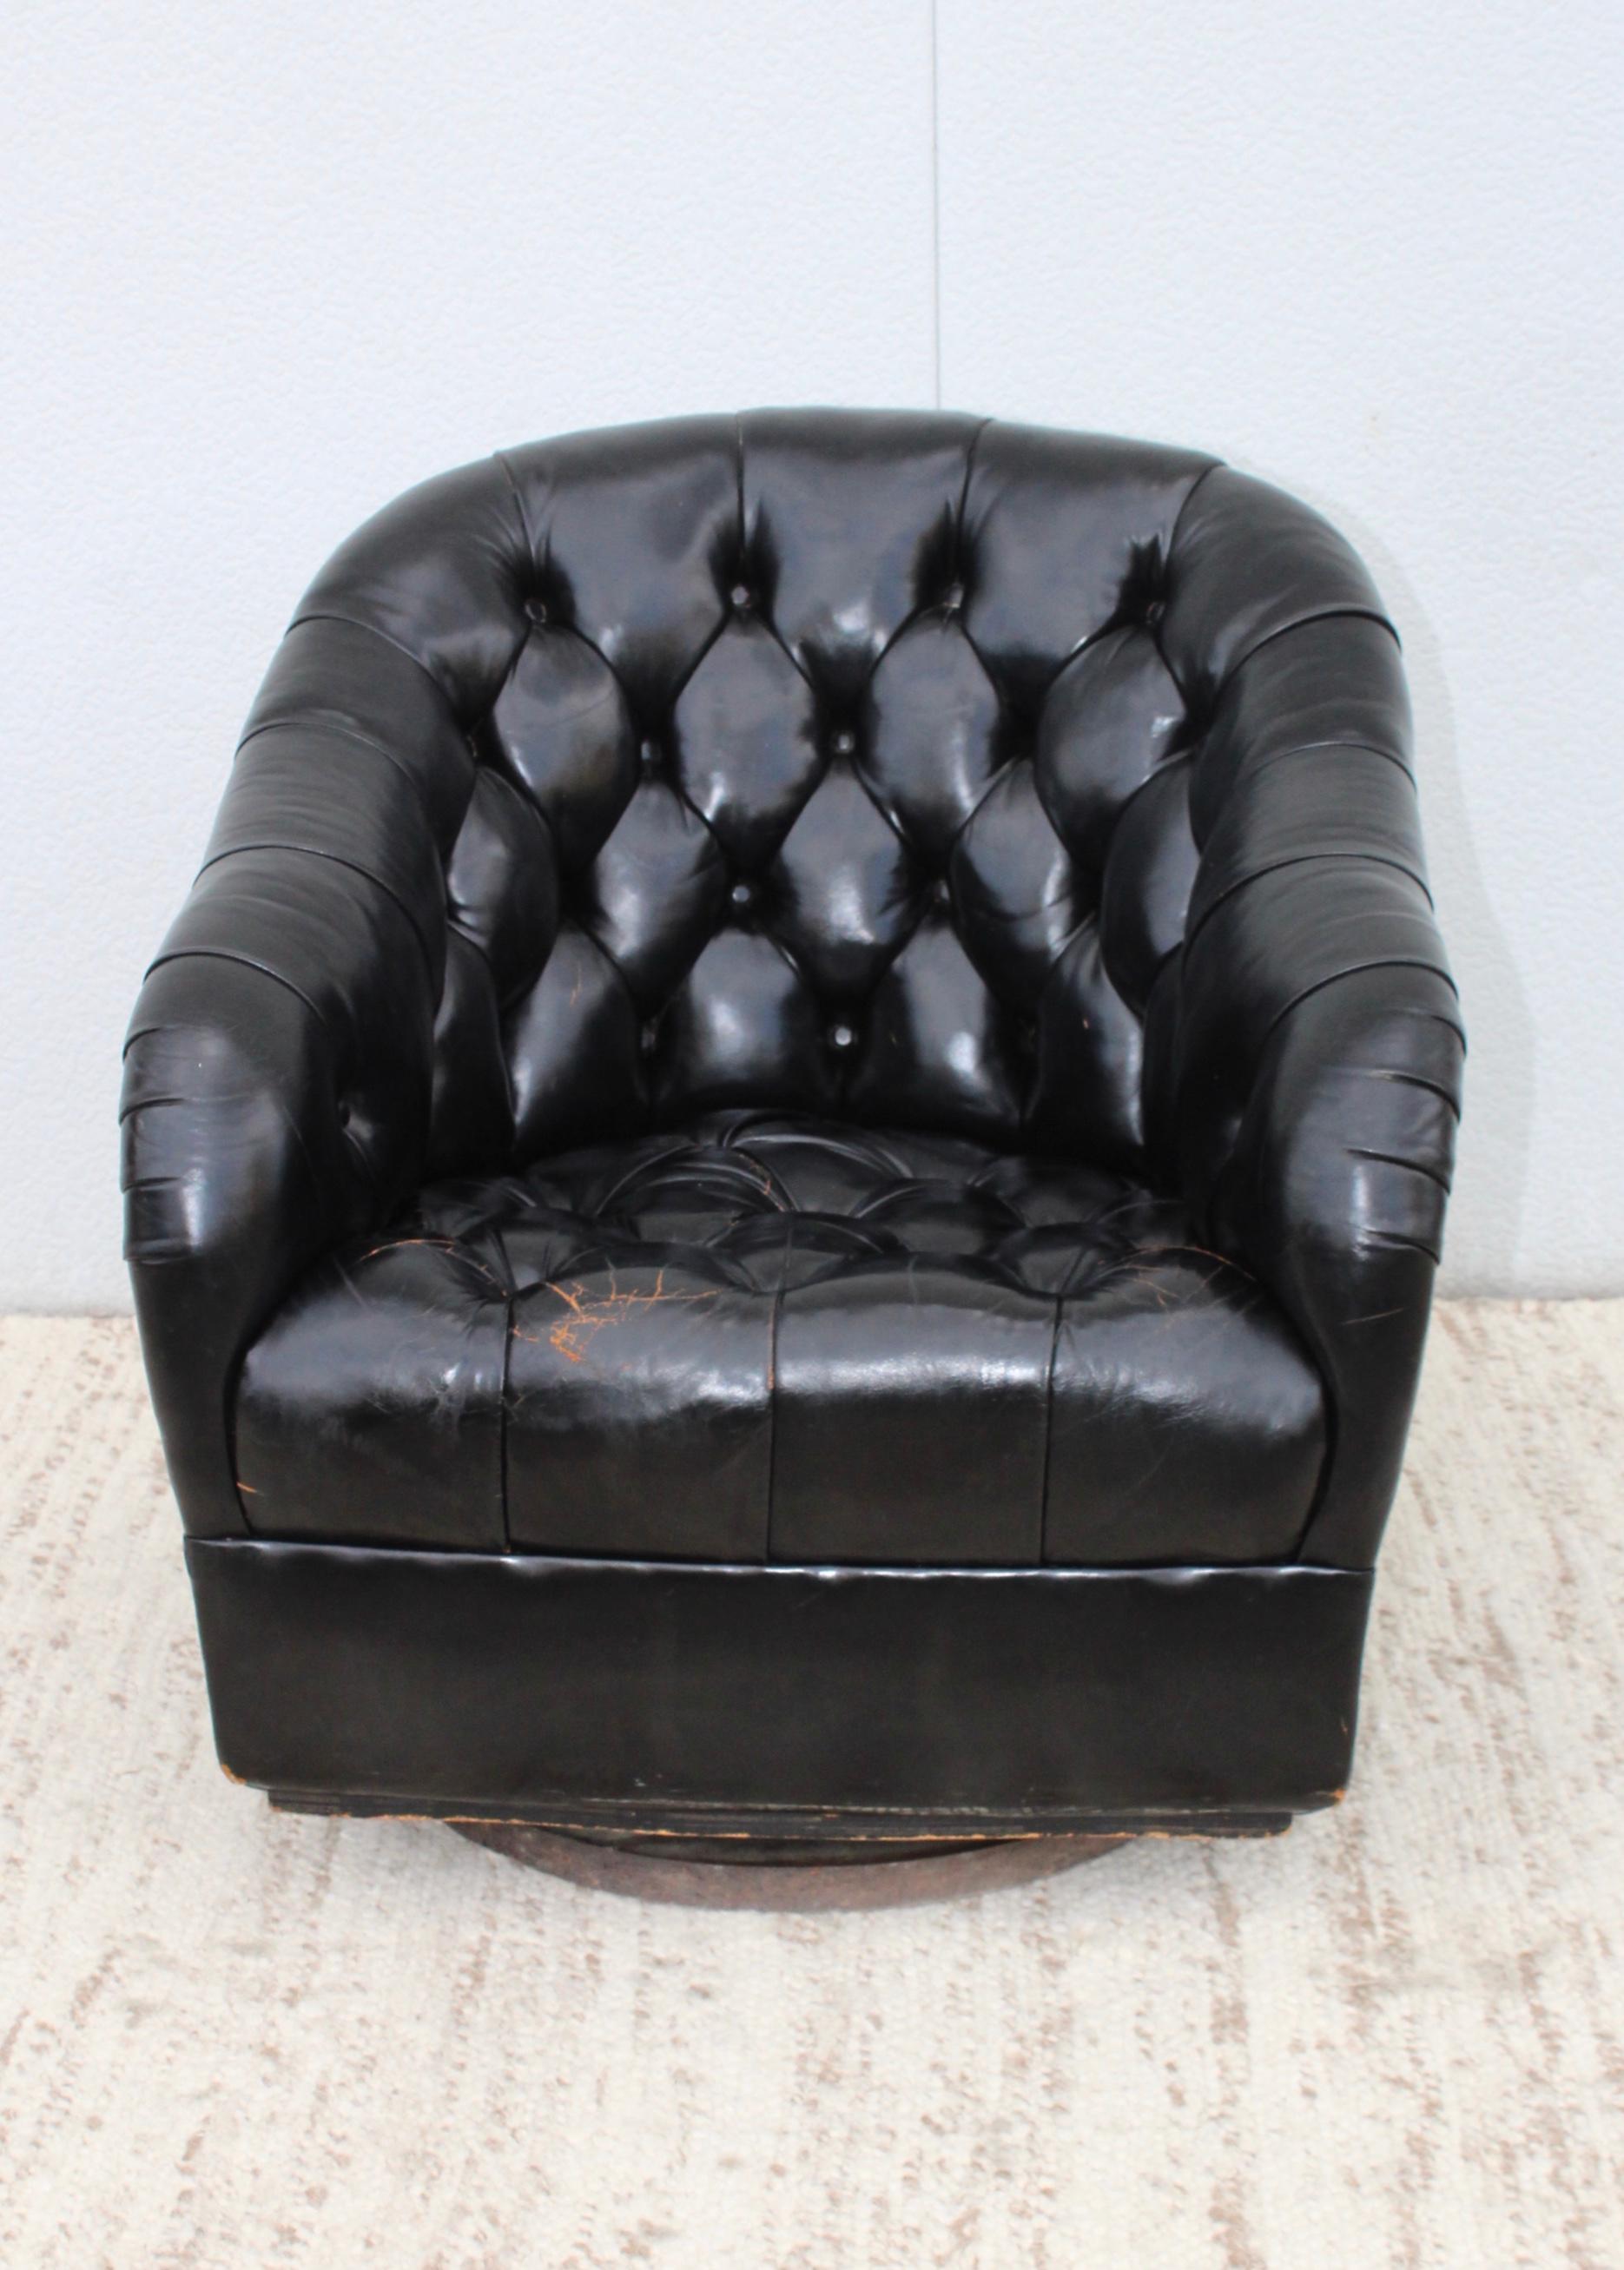 Stunning 1970s distressed leather swivel club chair designed by Ward Bennett.